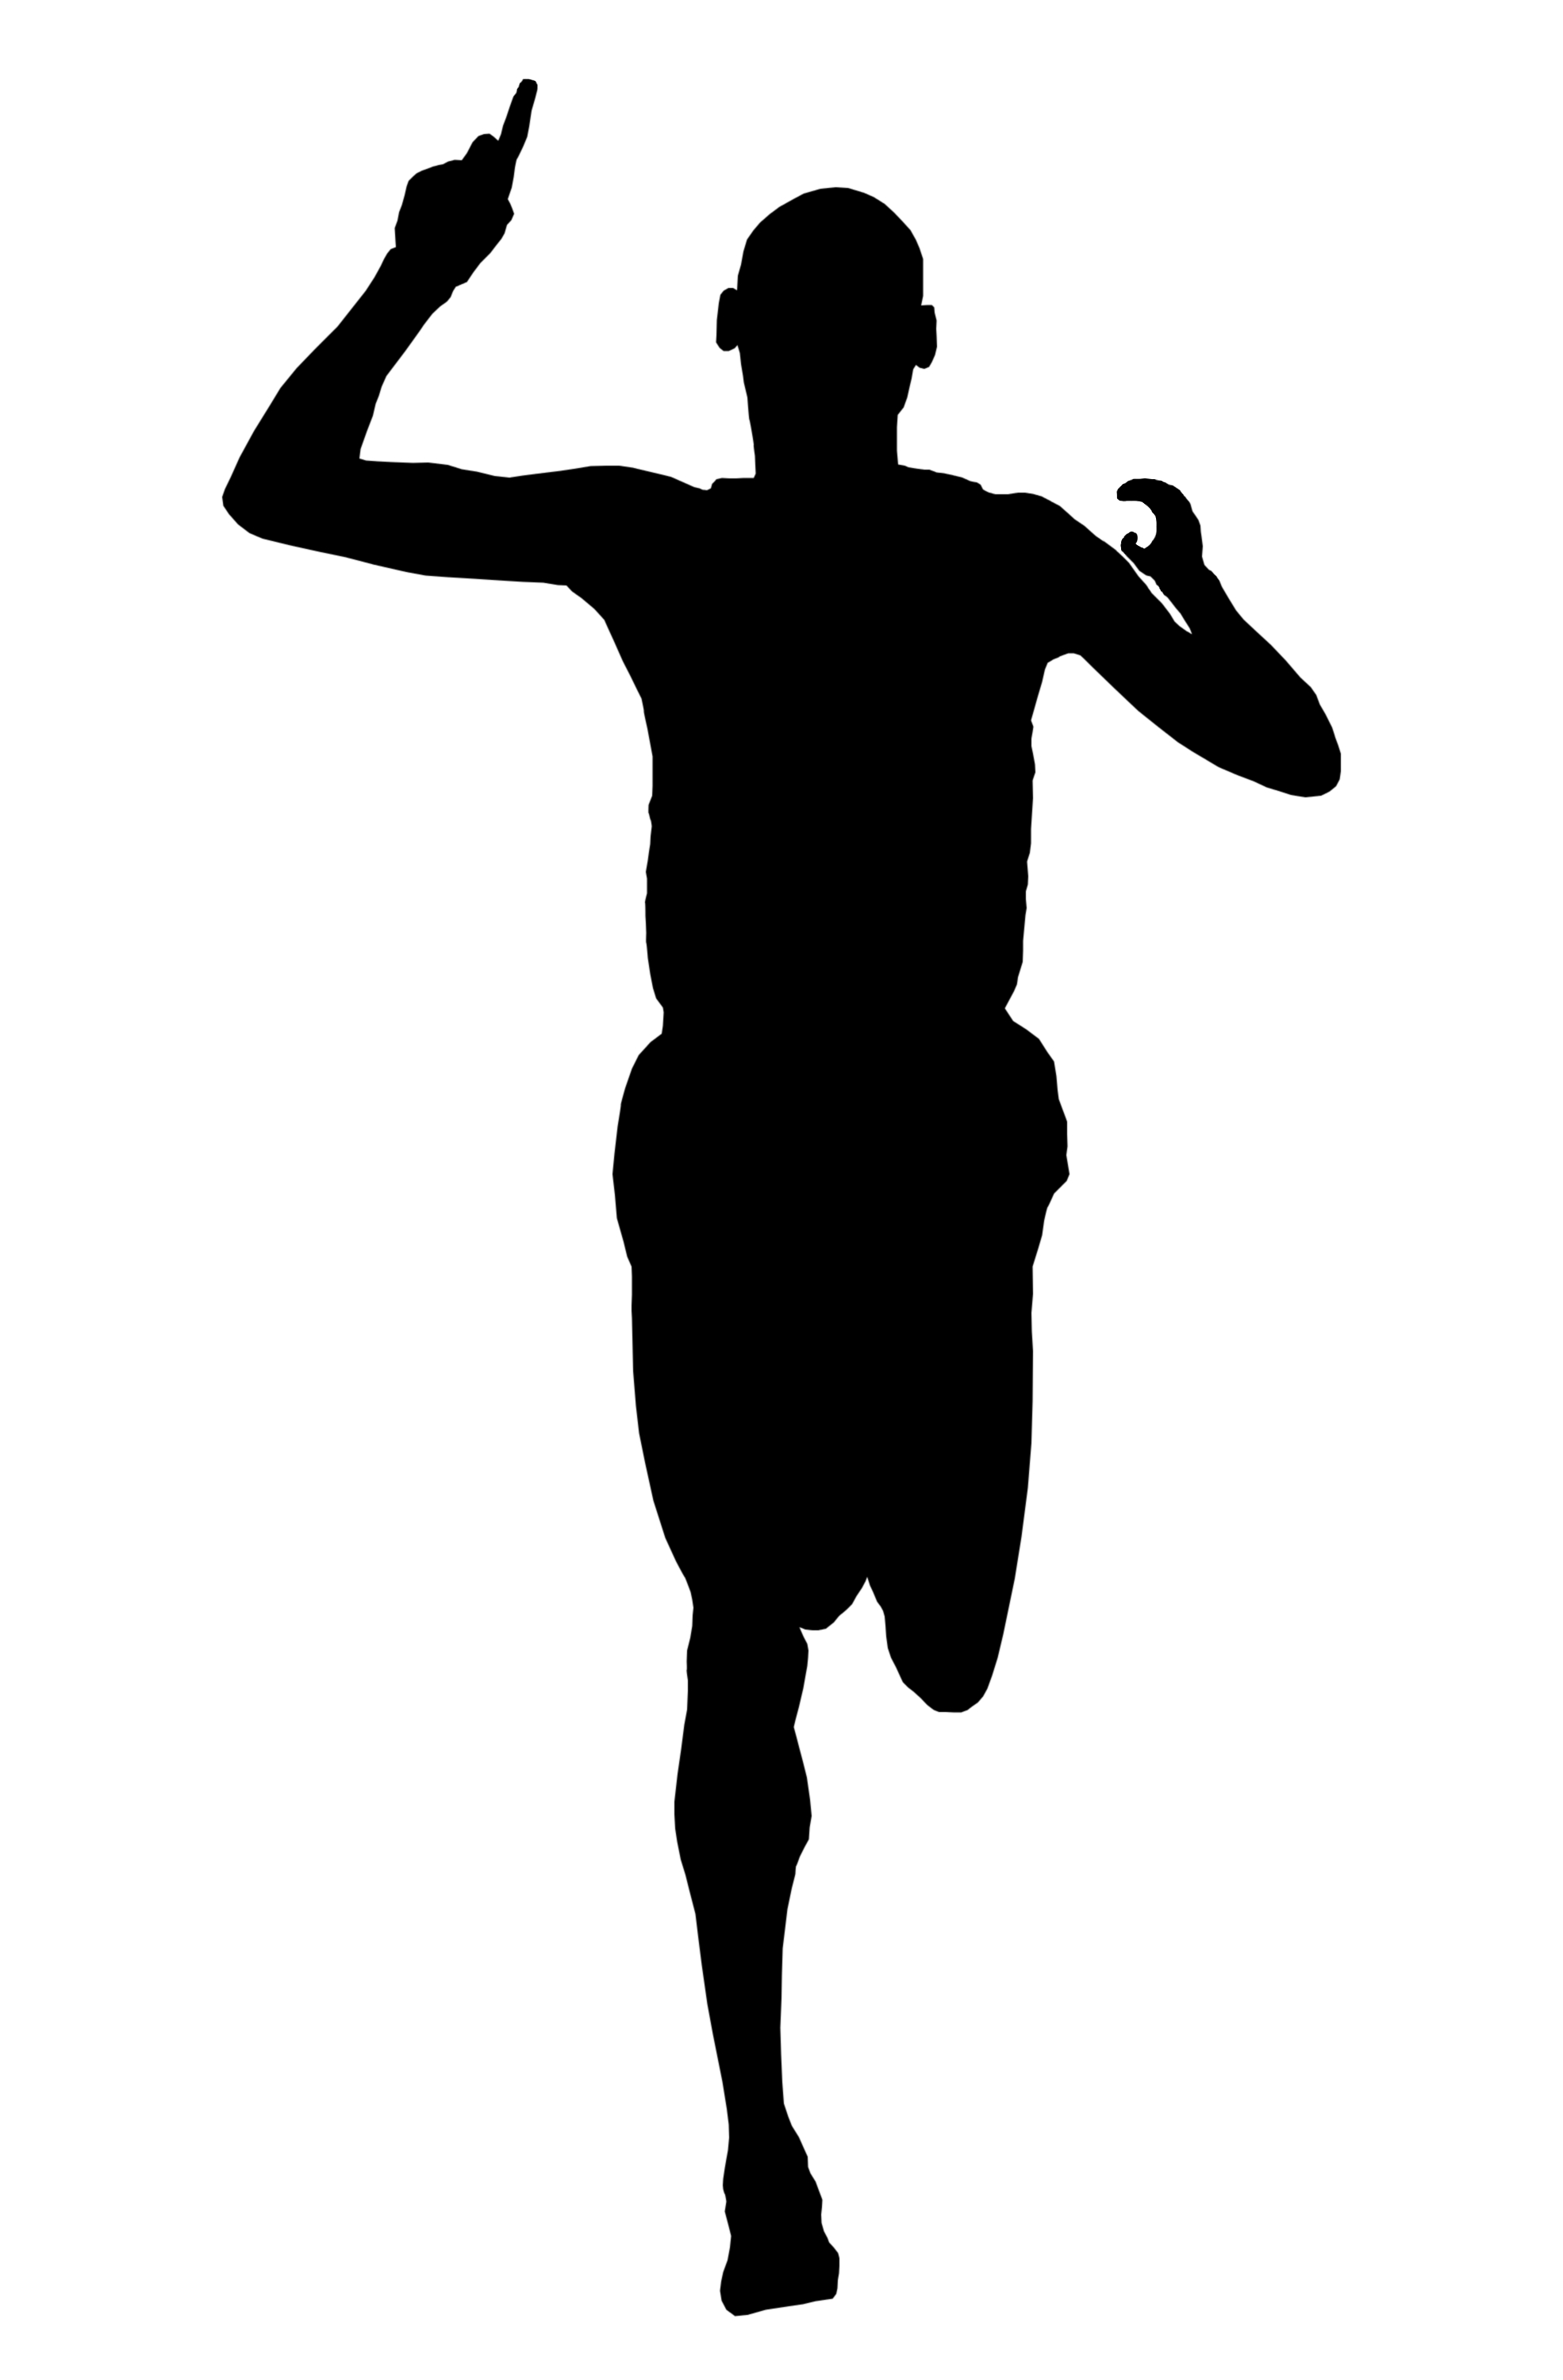 Pictures Of Runners - ClipArt Best